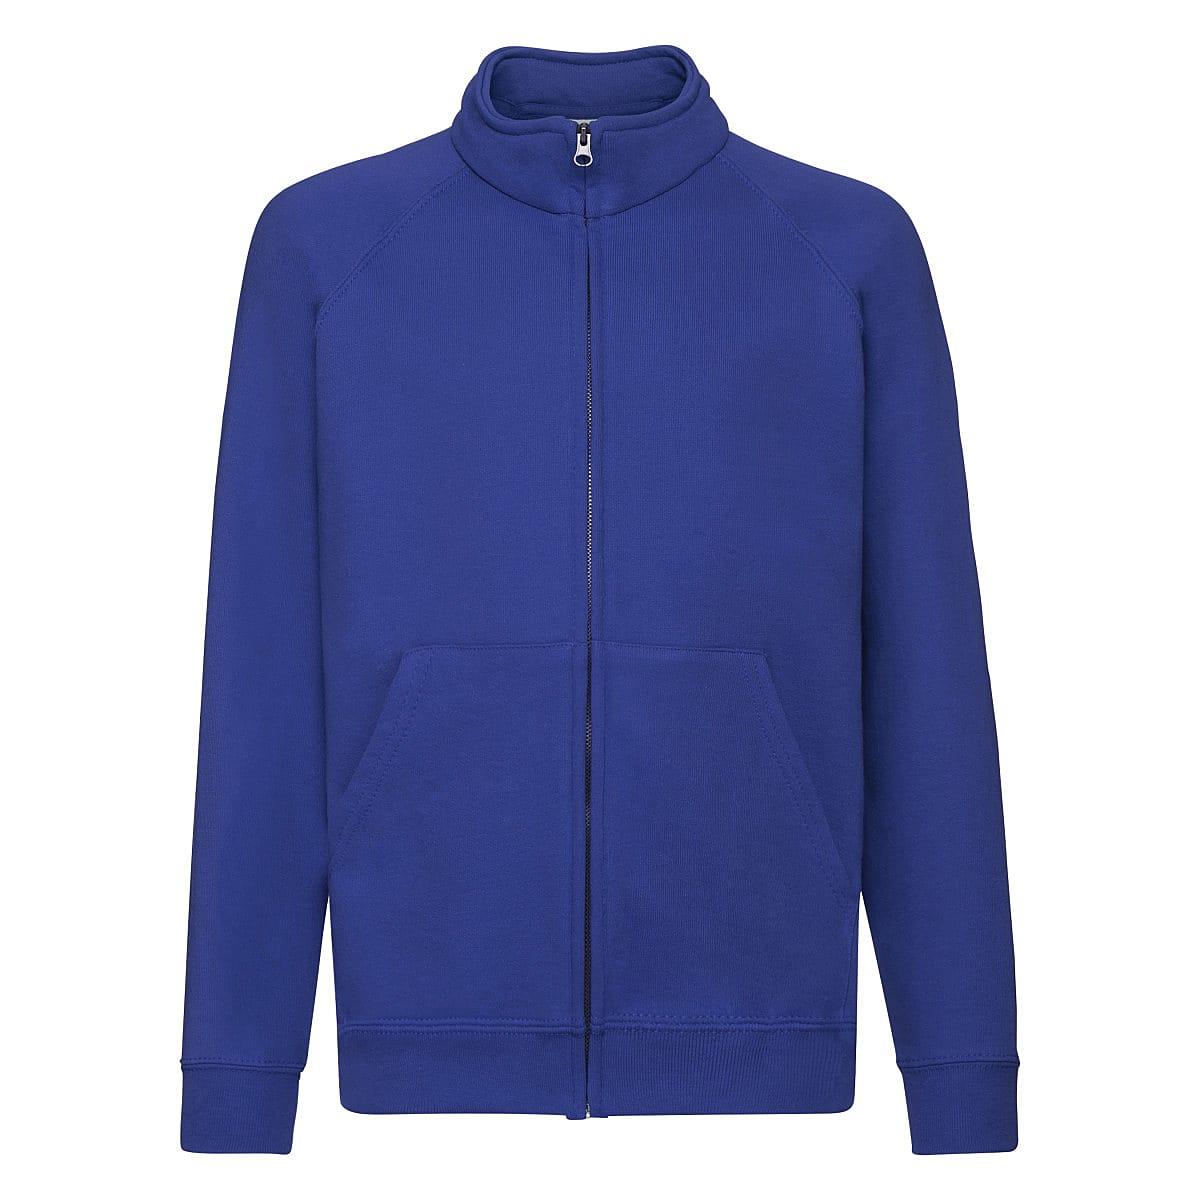 Fruit Of The Loom Childrens Sweat Jacket in Royal Blue (Product Code: 62005)